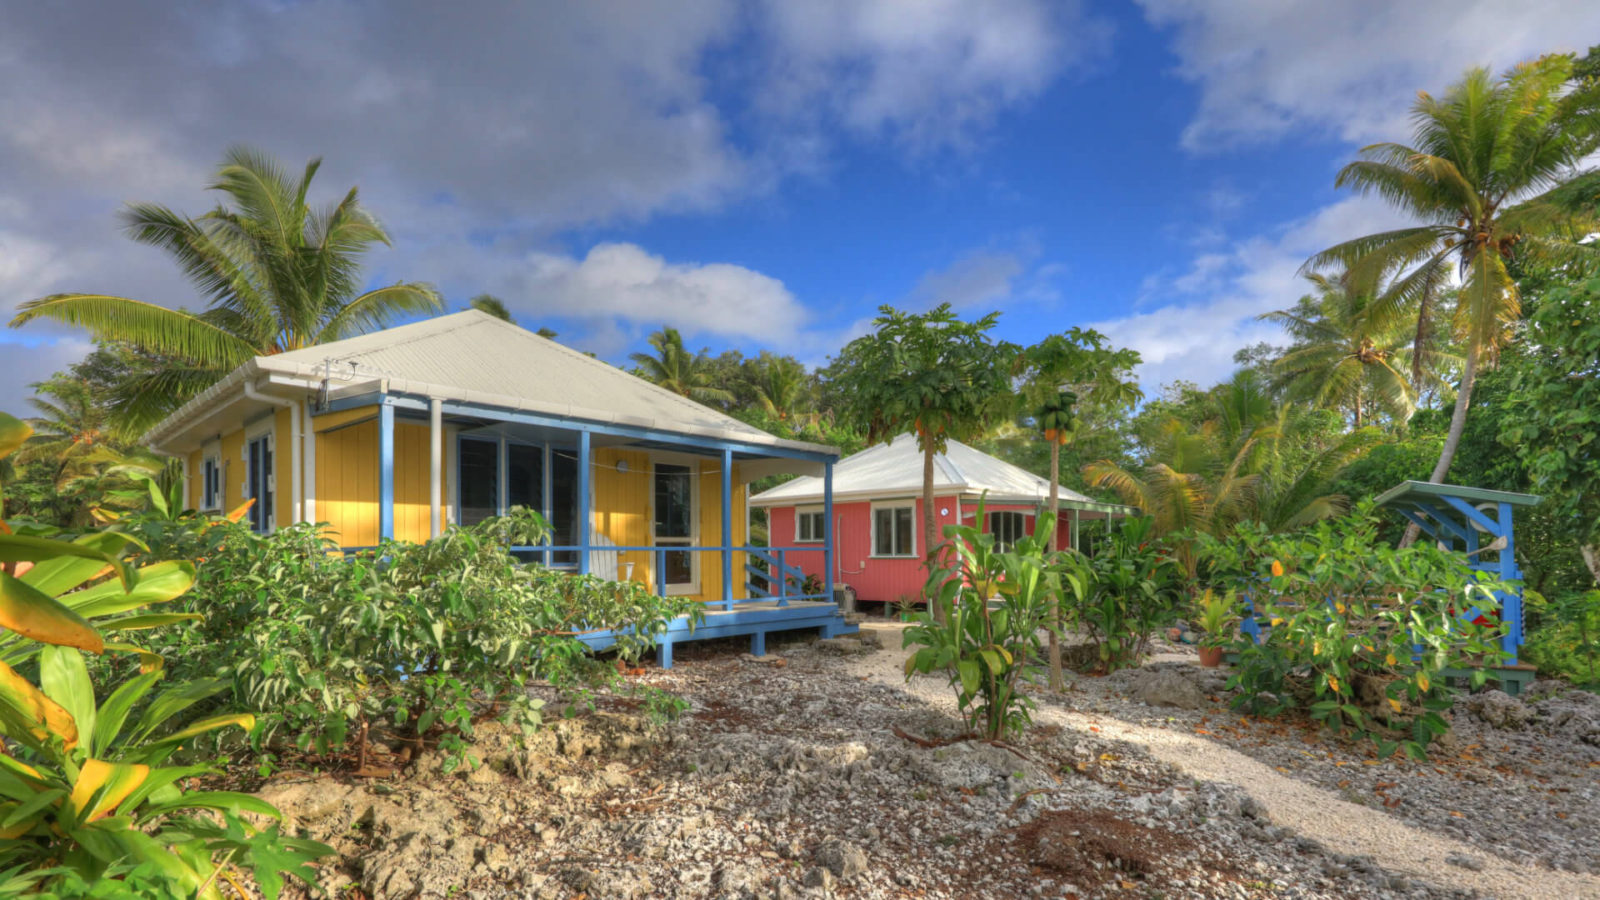 Breeze Accommodation Self Contained Cottages Niue Island